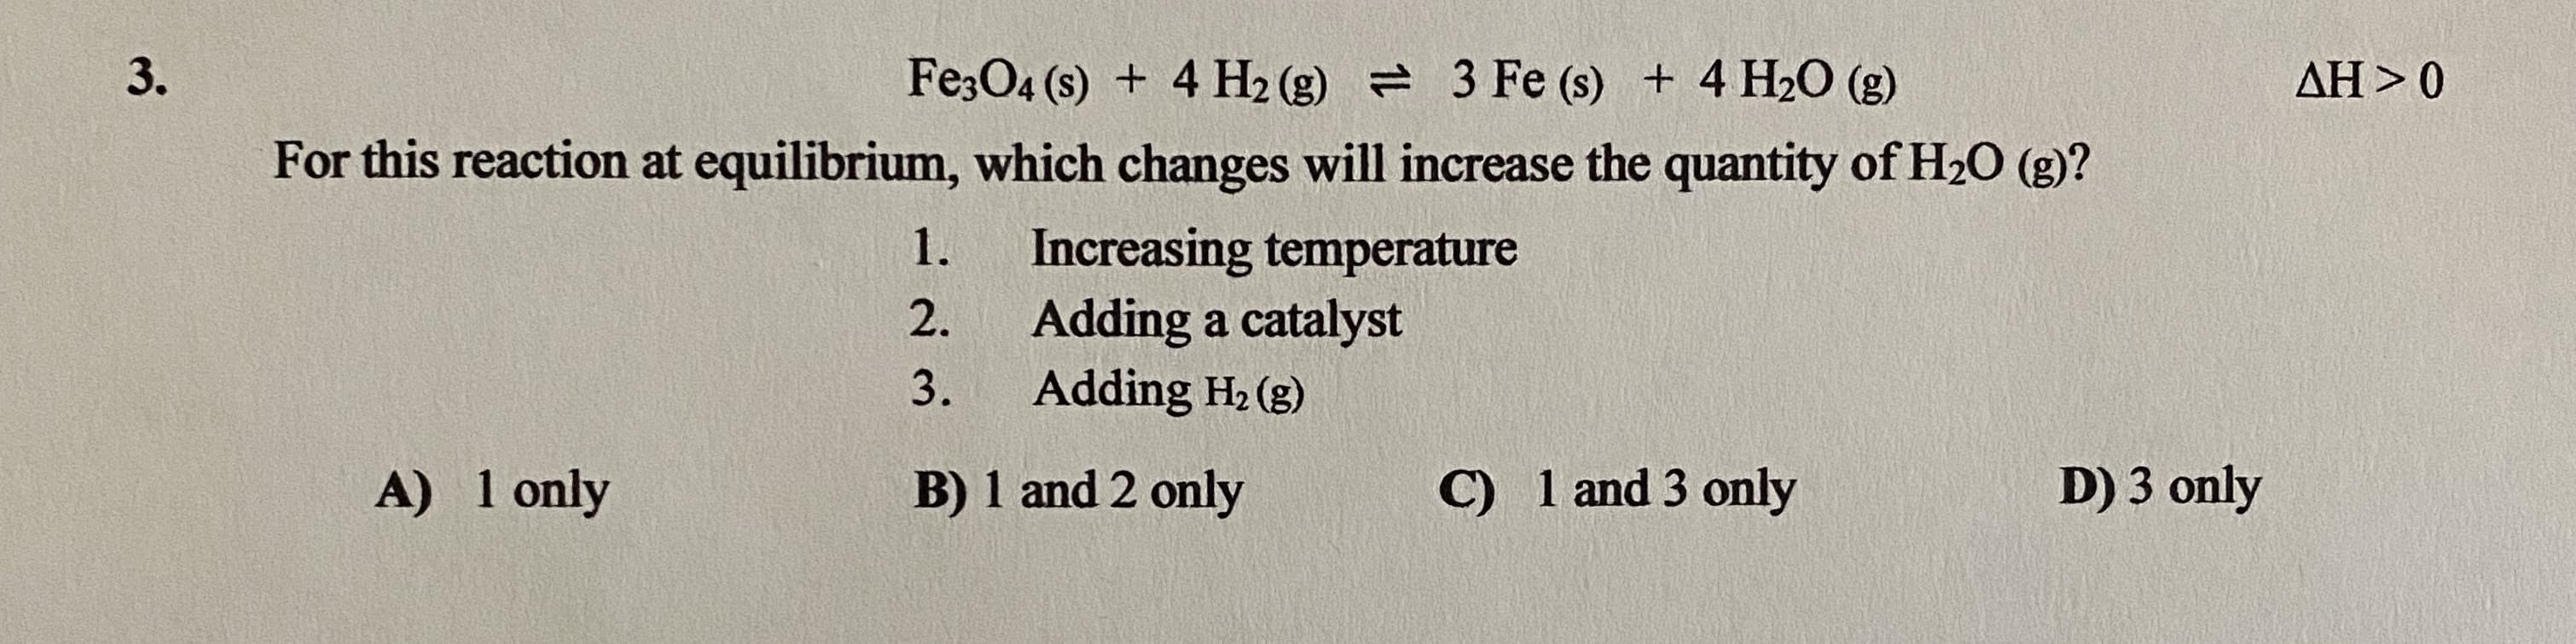 Fe;O4 (s) + 4 H2 (g) = 3 Fe (s) + 4 H20 (g)
AH > 0
For this reaction at equilibrium, which changes will increase the quantity of H20 (g)?
Increasing temperature
Adding a catalyst
Adding H2 (g)
1.
2.
3.
A) 1 only
B) 1 and 2 only
C) 1 and 3 only
D) 3 only
3.
